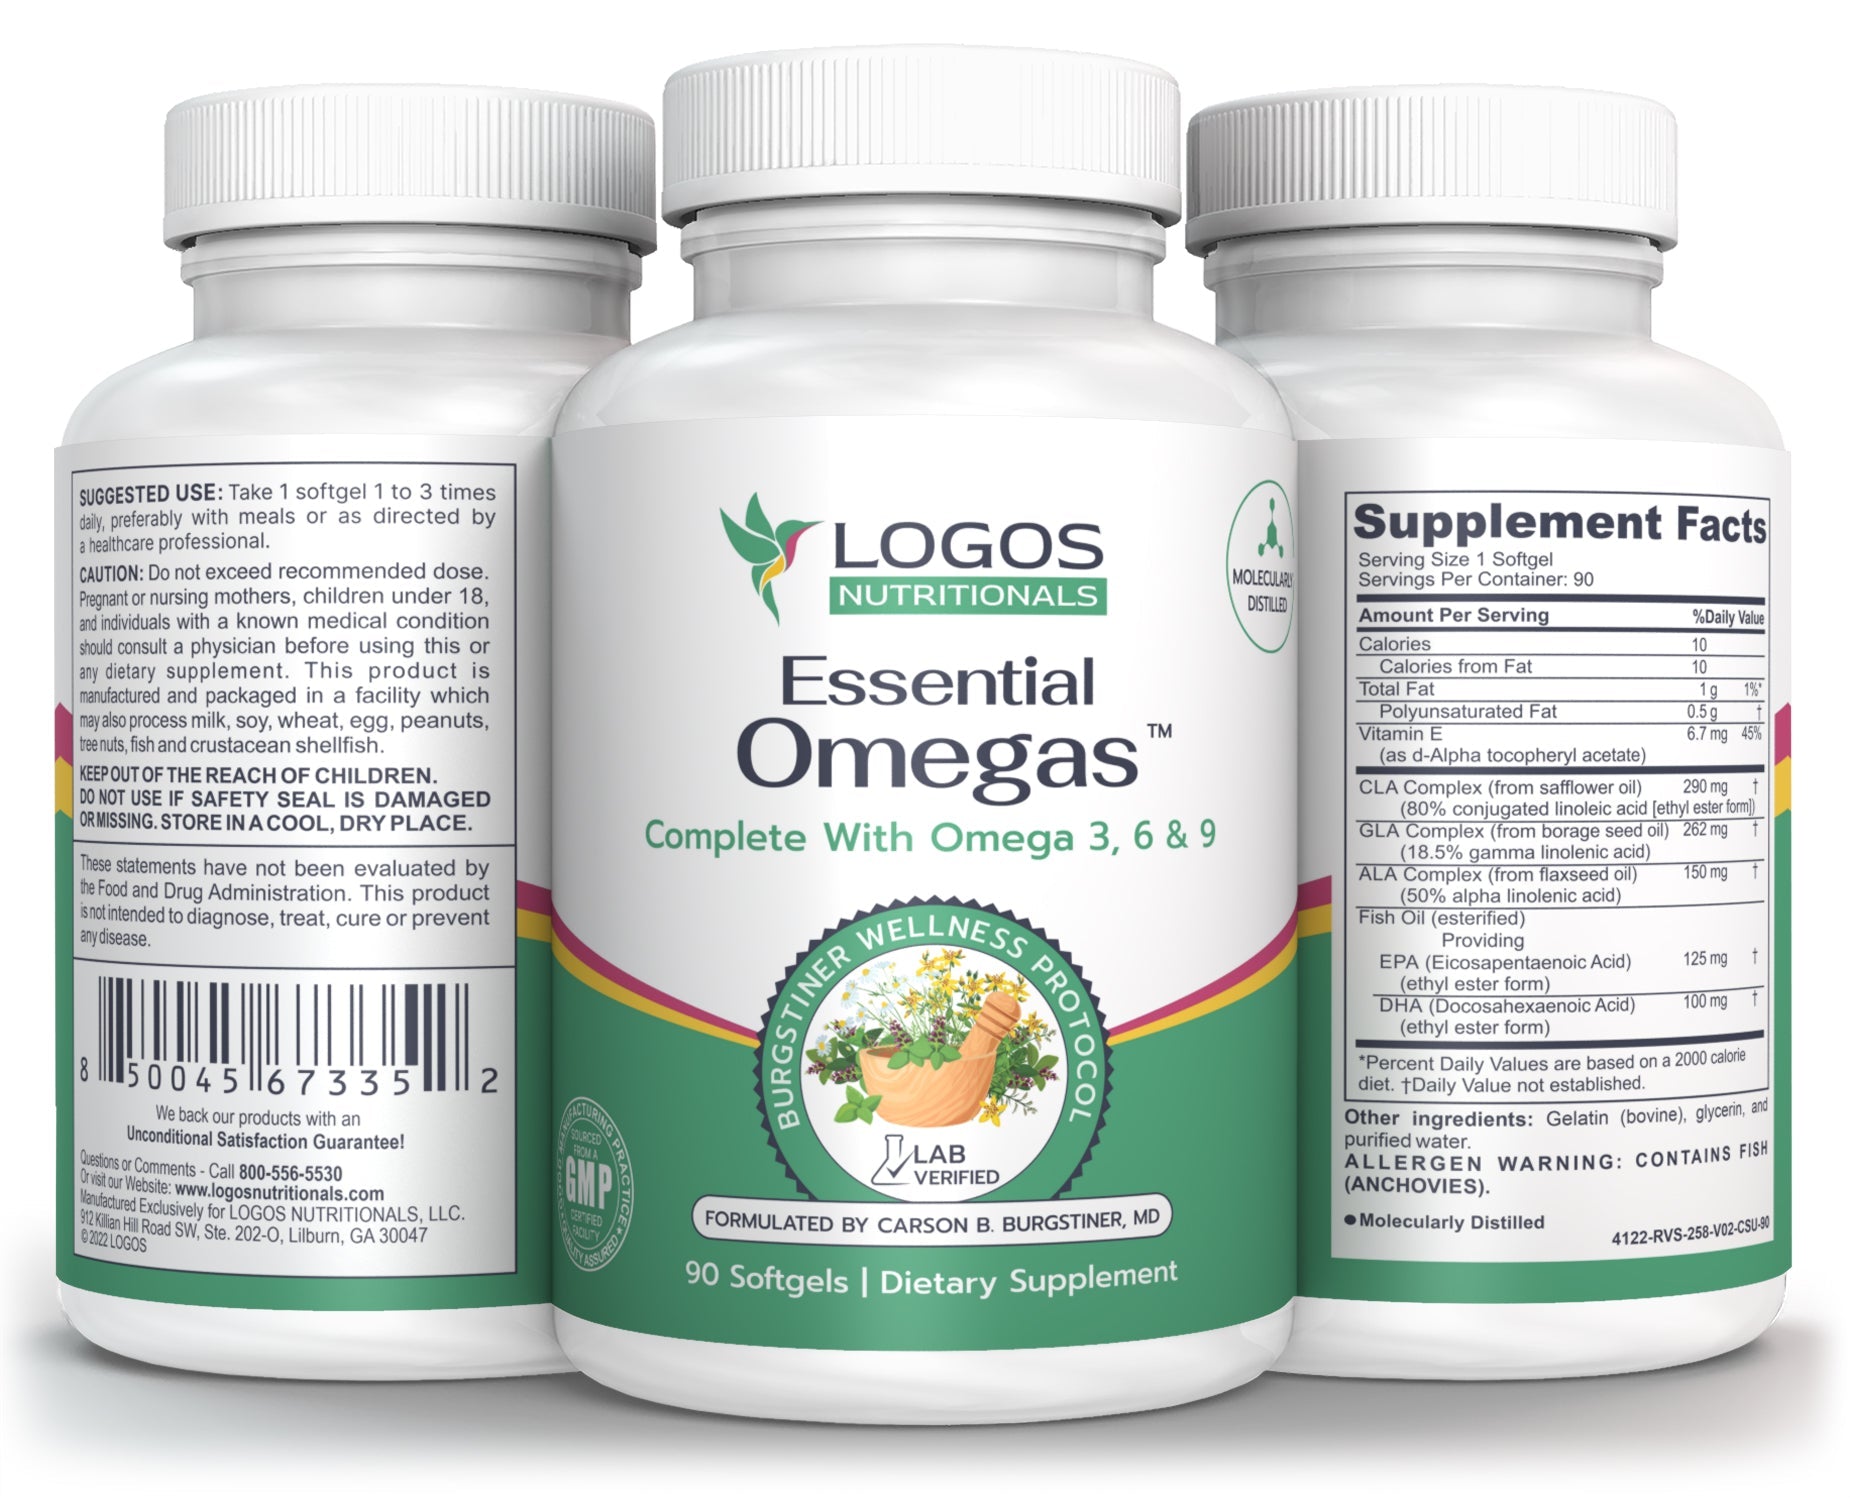 Regenerative Support for Wound Care - Essential Omegas